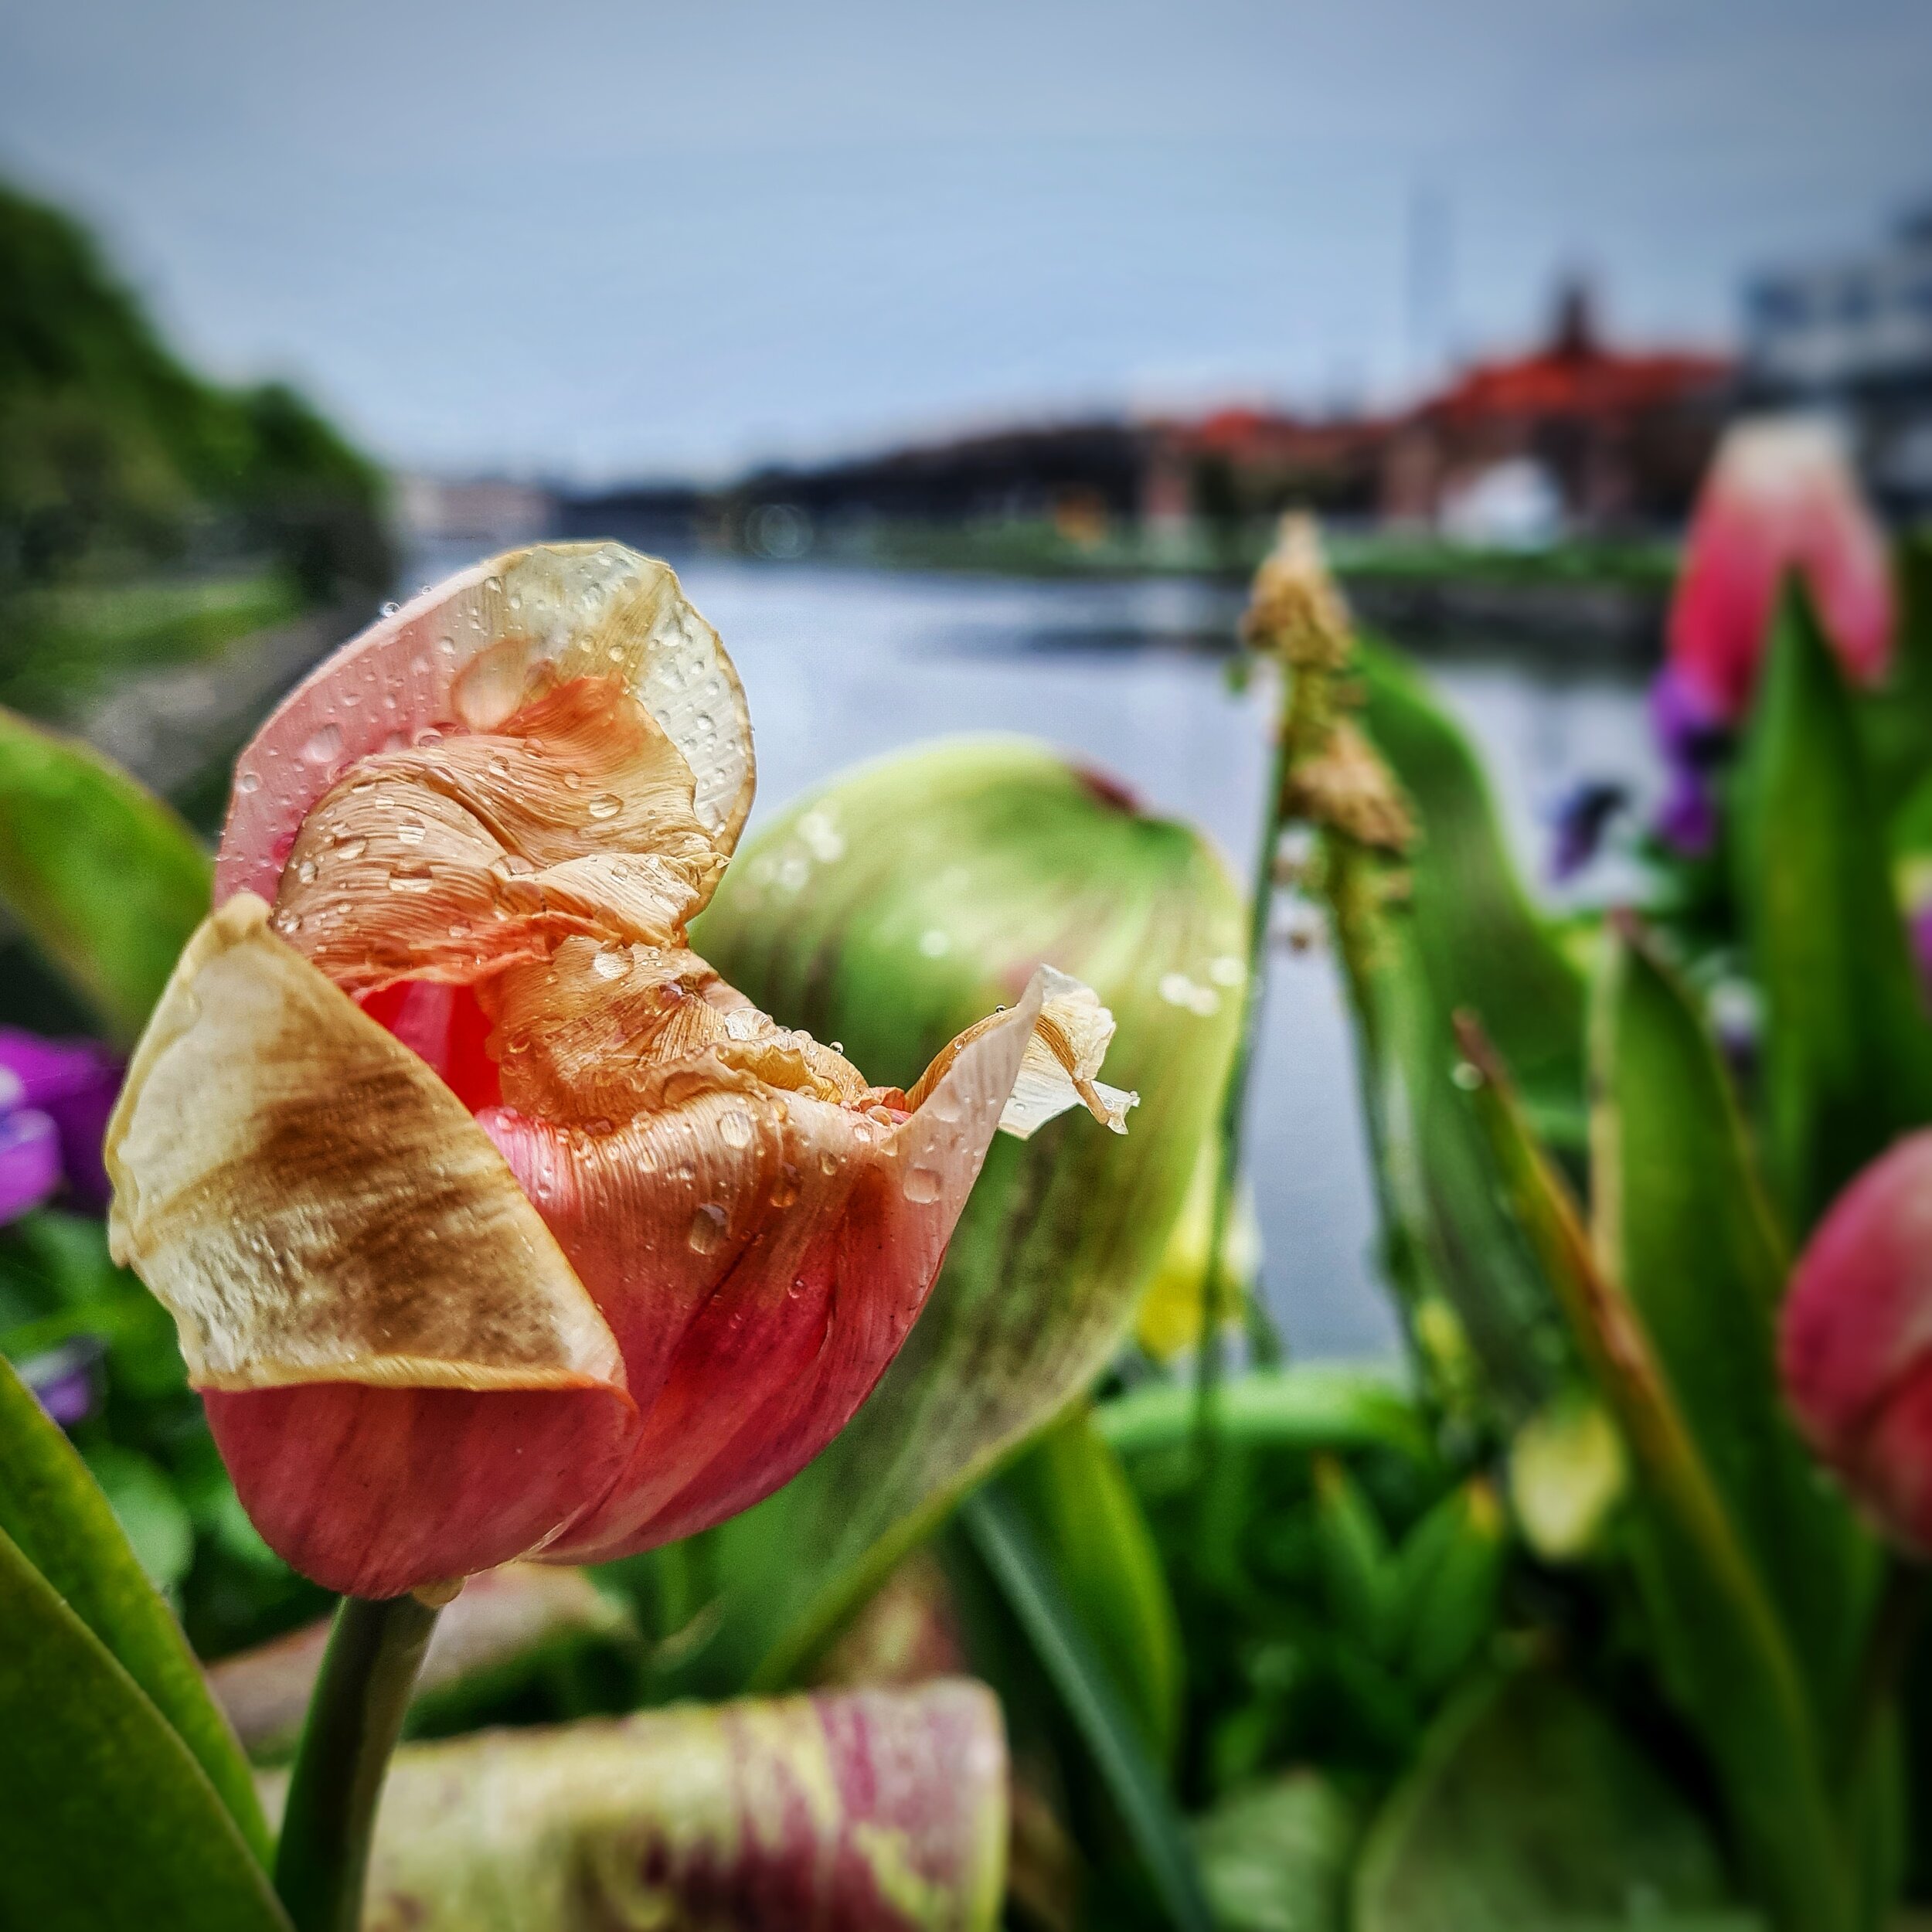 Day 124 - May 4: Wet Tulip